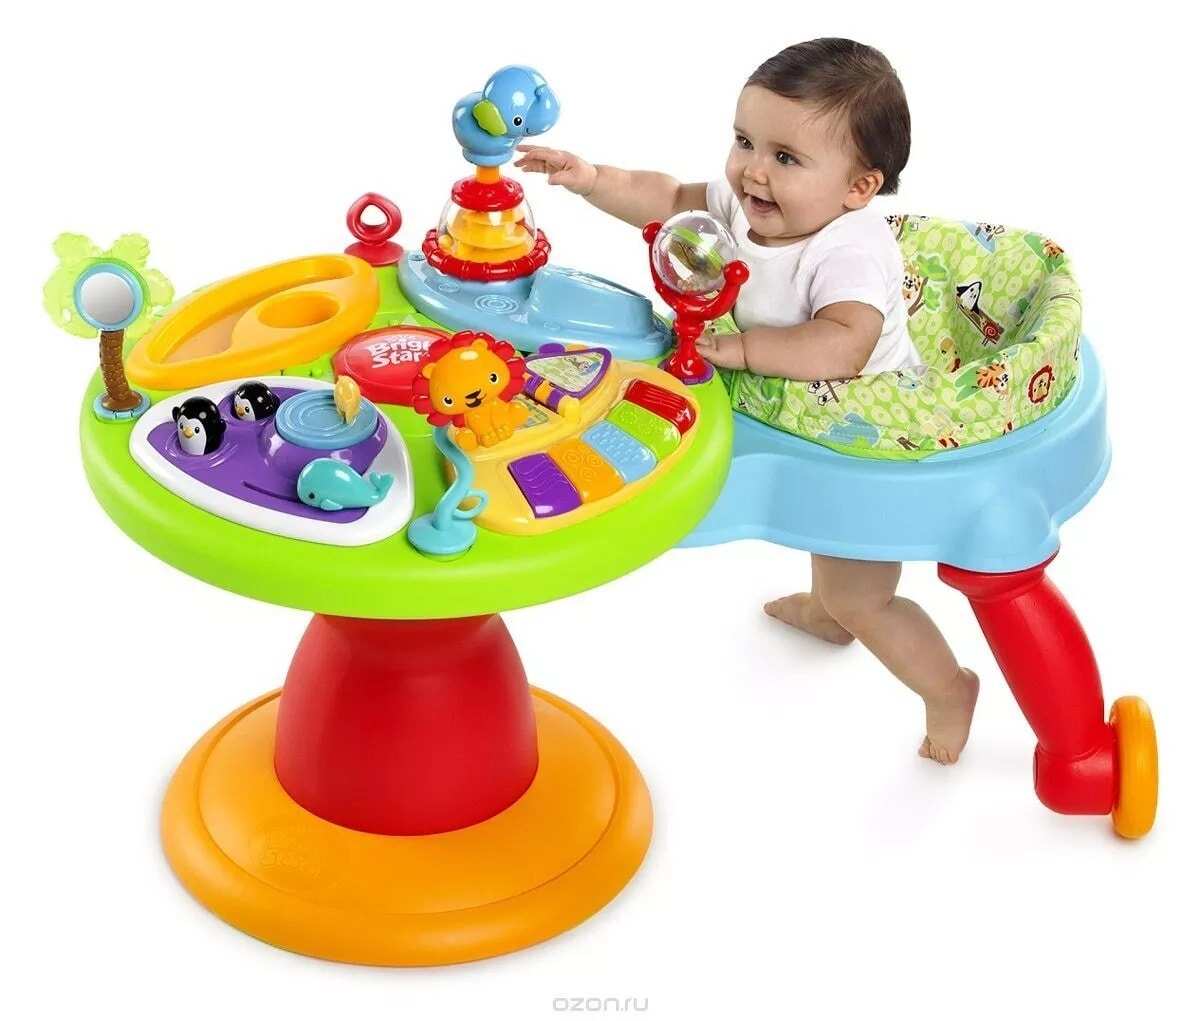 at what age can a baby use a walker